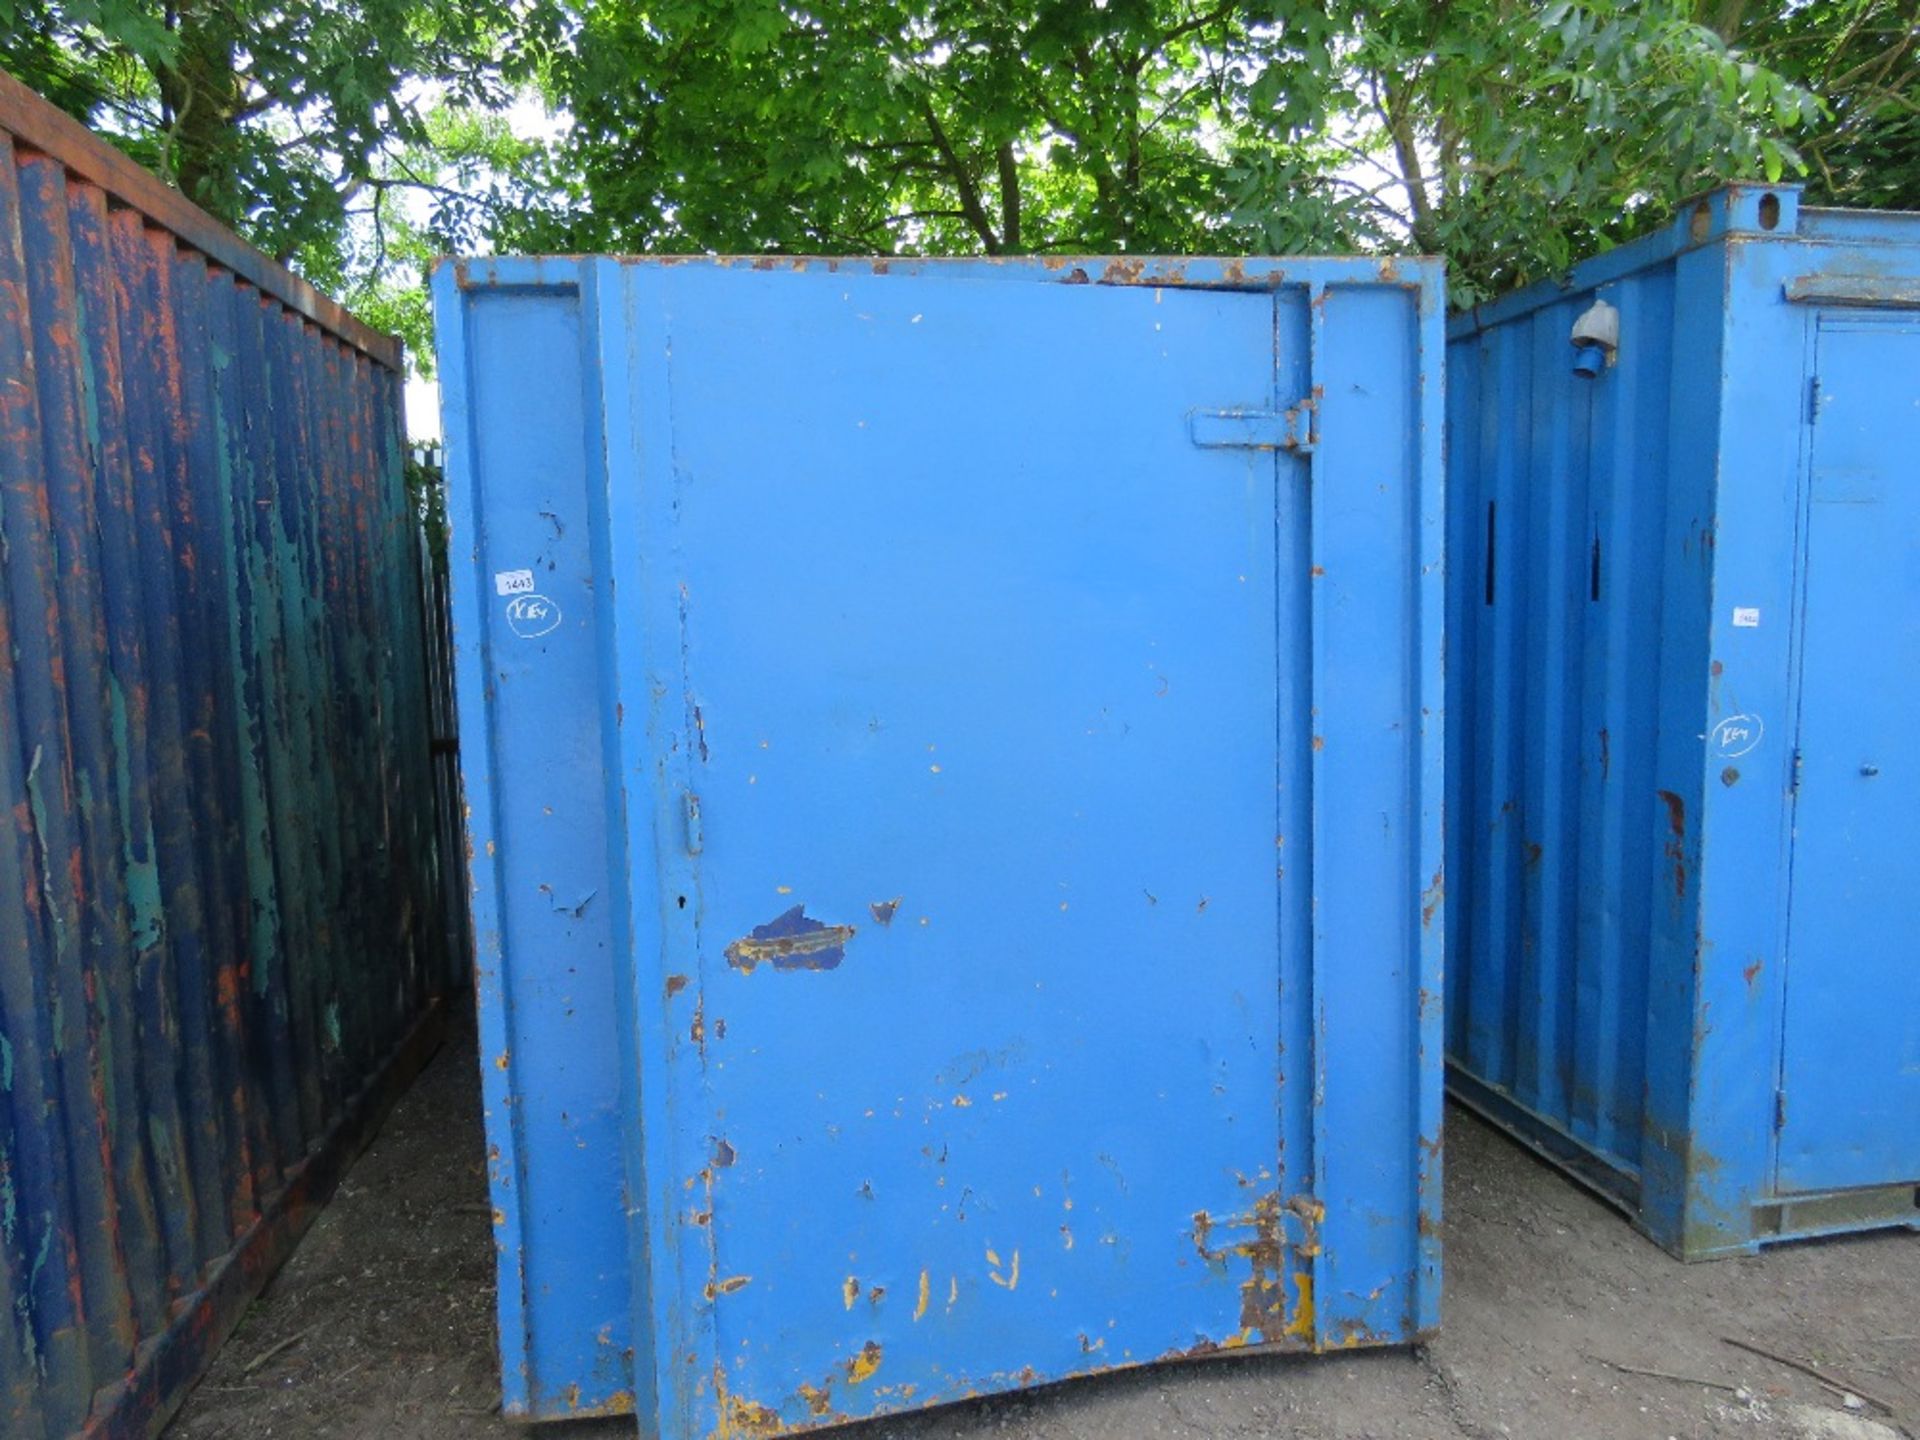 CHAIN LIFT SKIP TYPE ENCLOSED STORAGE CONTAINER 6FT WIDE X 10FT LENGTH APPROX WITH KEY. TS13.